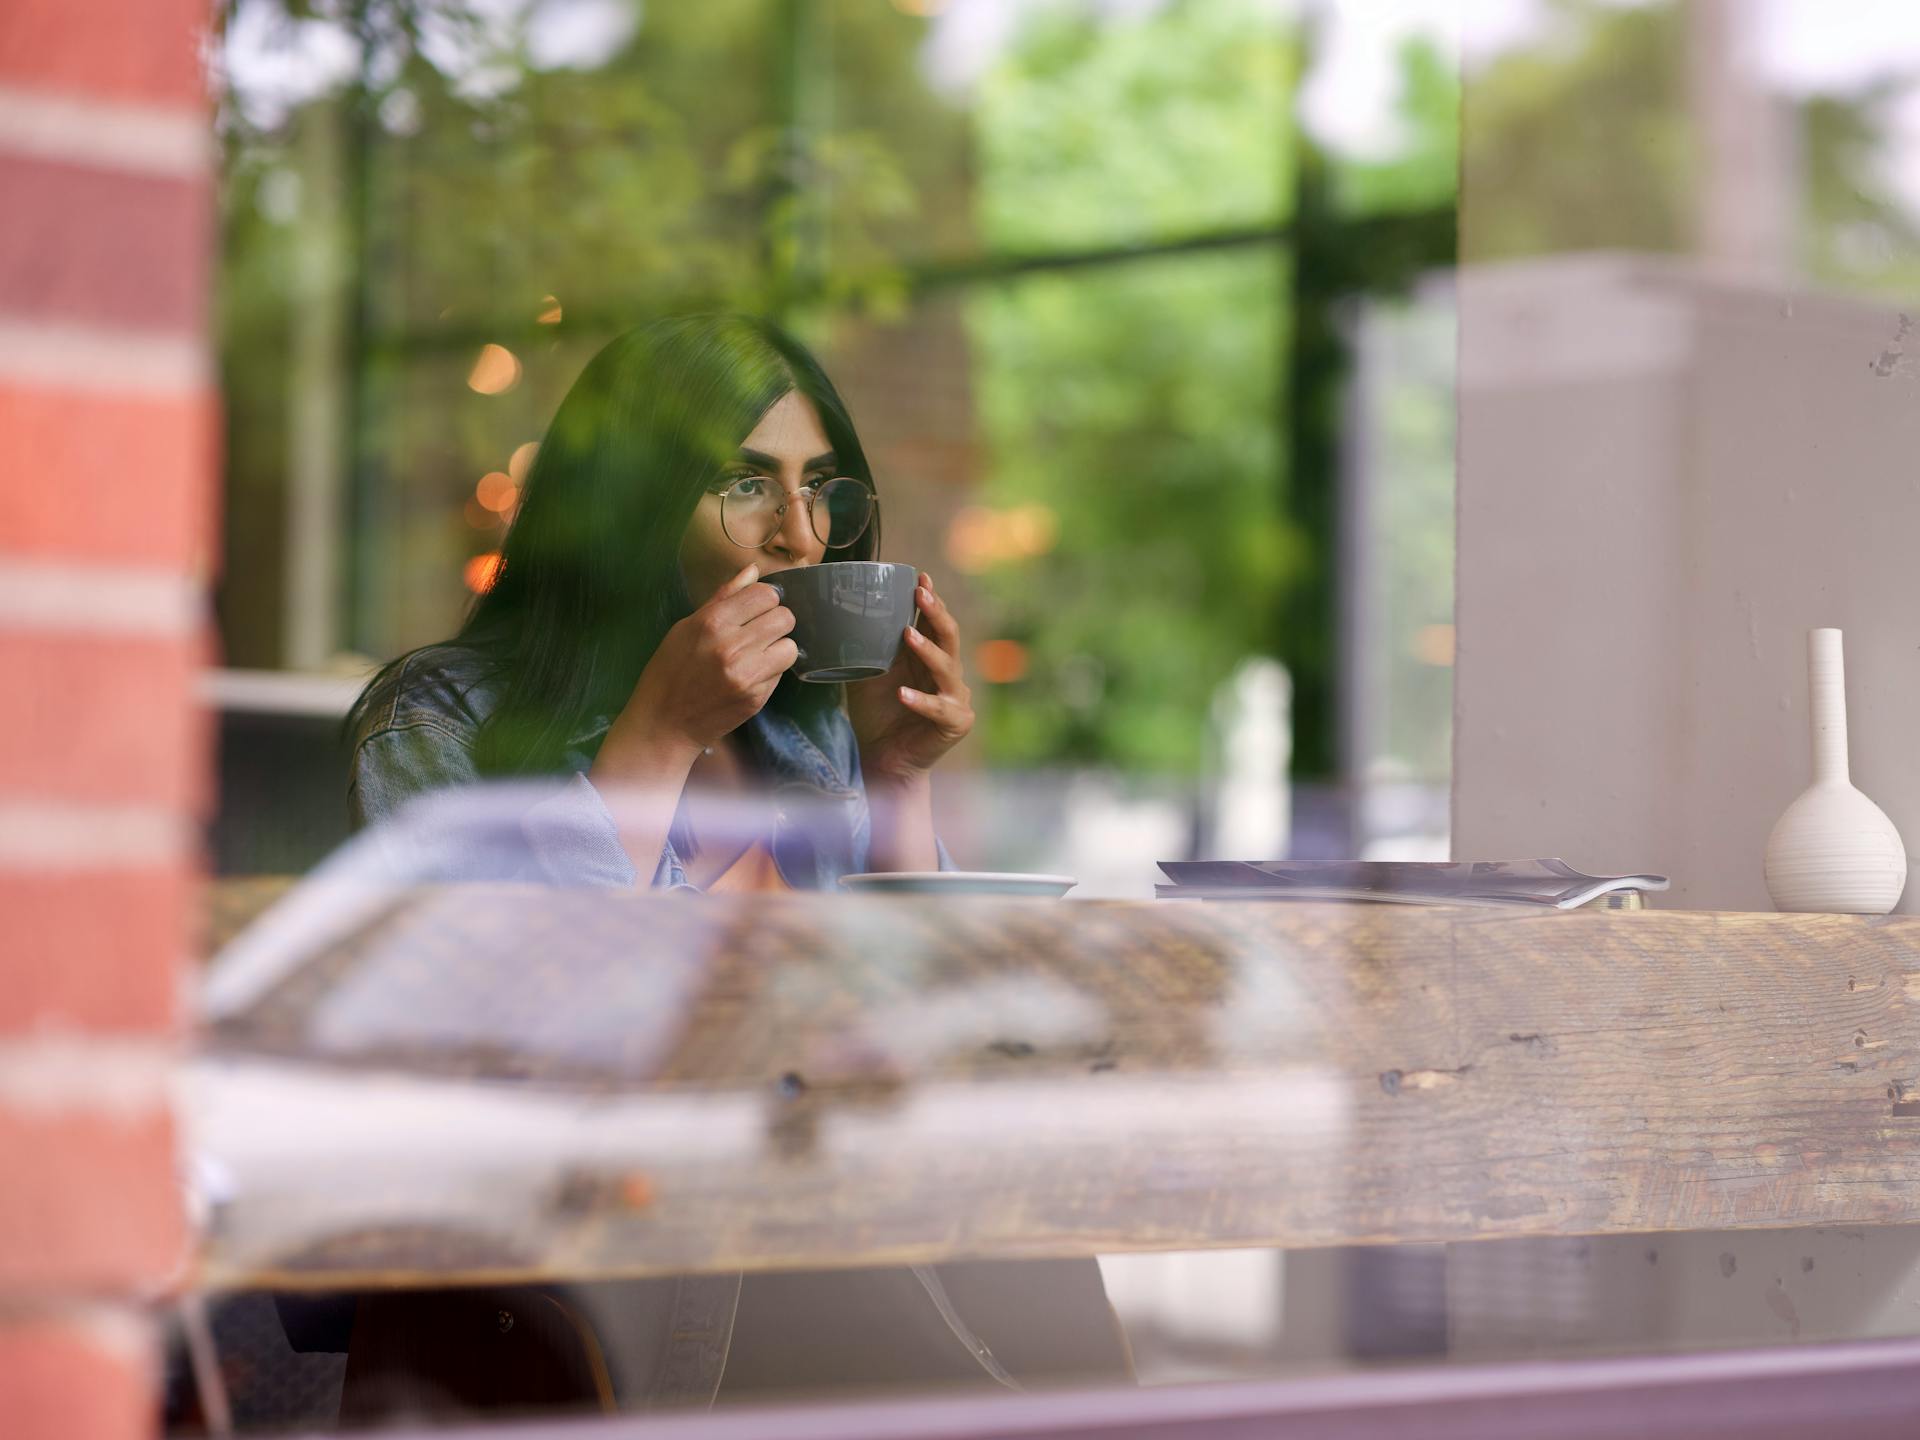 A woman sitting in a café and drinking from a mug while looking outside from the window | Source: Pexels